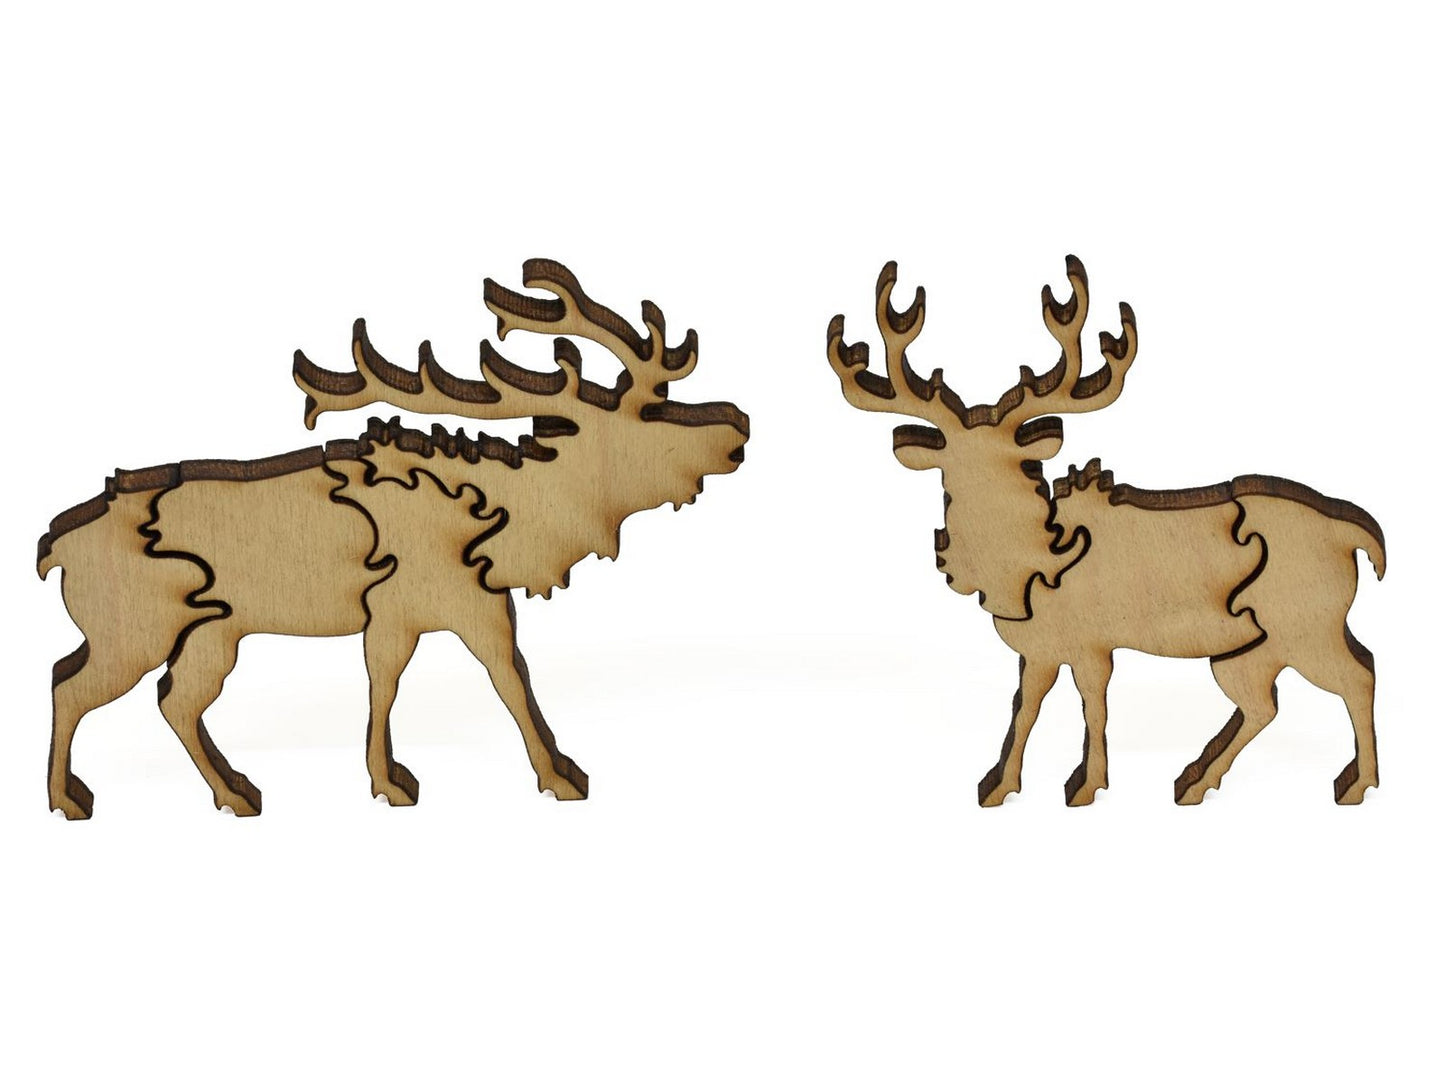 A closeup of pieces showing a pair of elk.